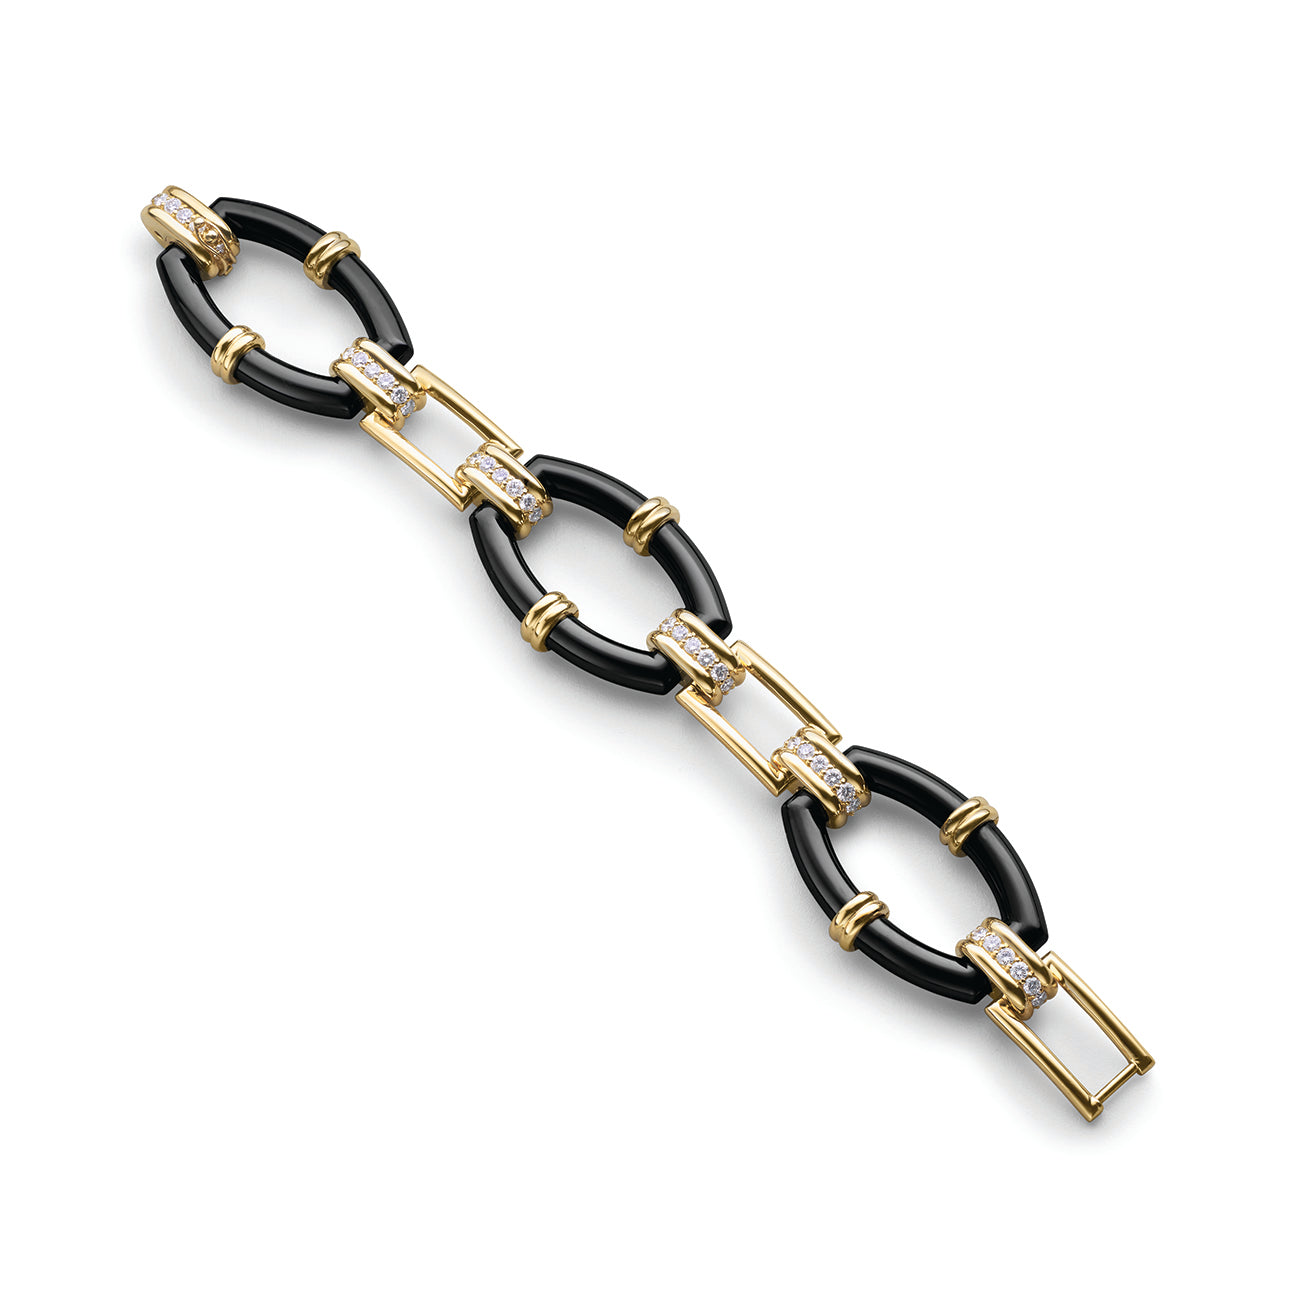 18k Yellow Gold Ceramic Link Bracelet (Available in Black and White)